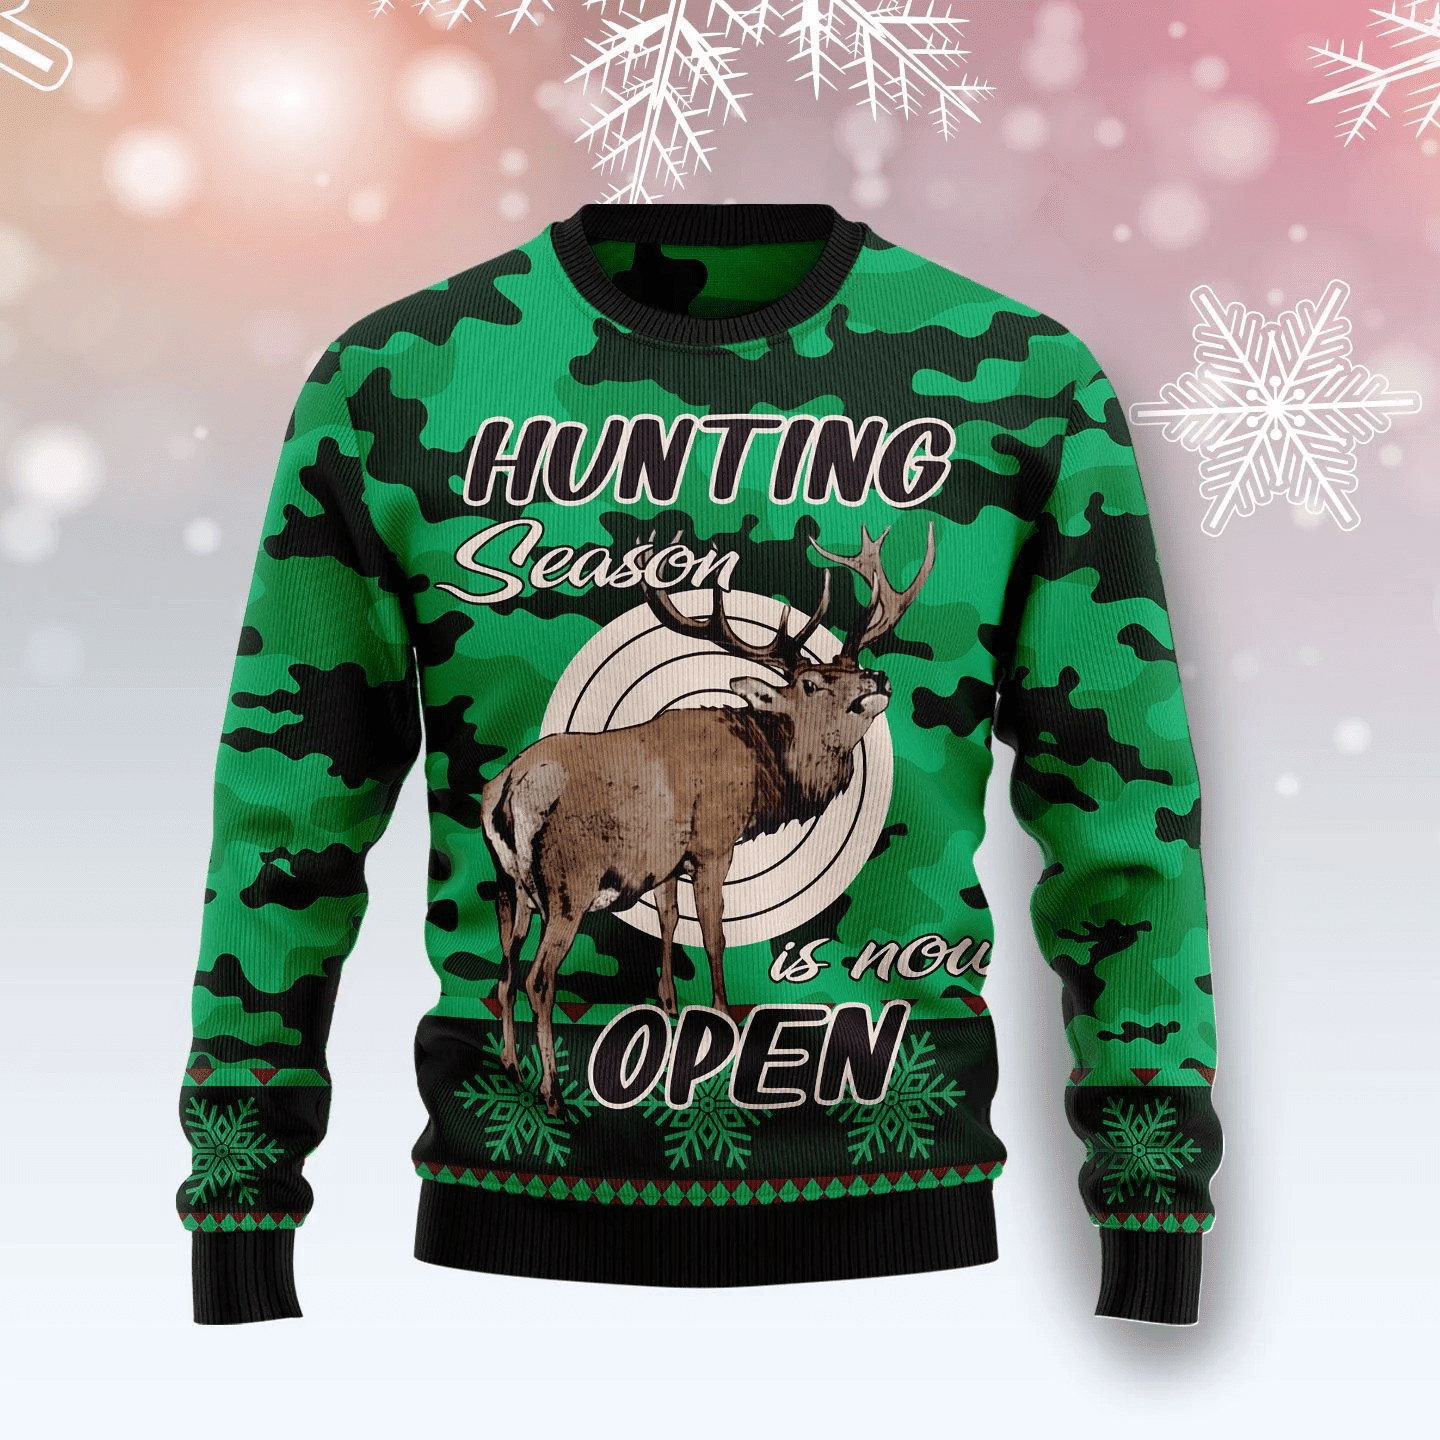 Hunting Season Ugly Christmas Sweater 3D Printed Best Gift For Xmas Adult | US4757 3D AOP Shirt